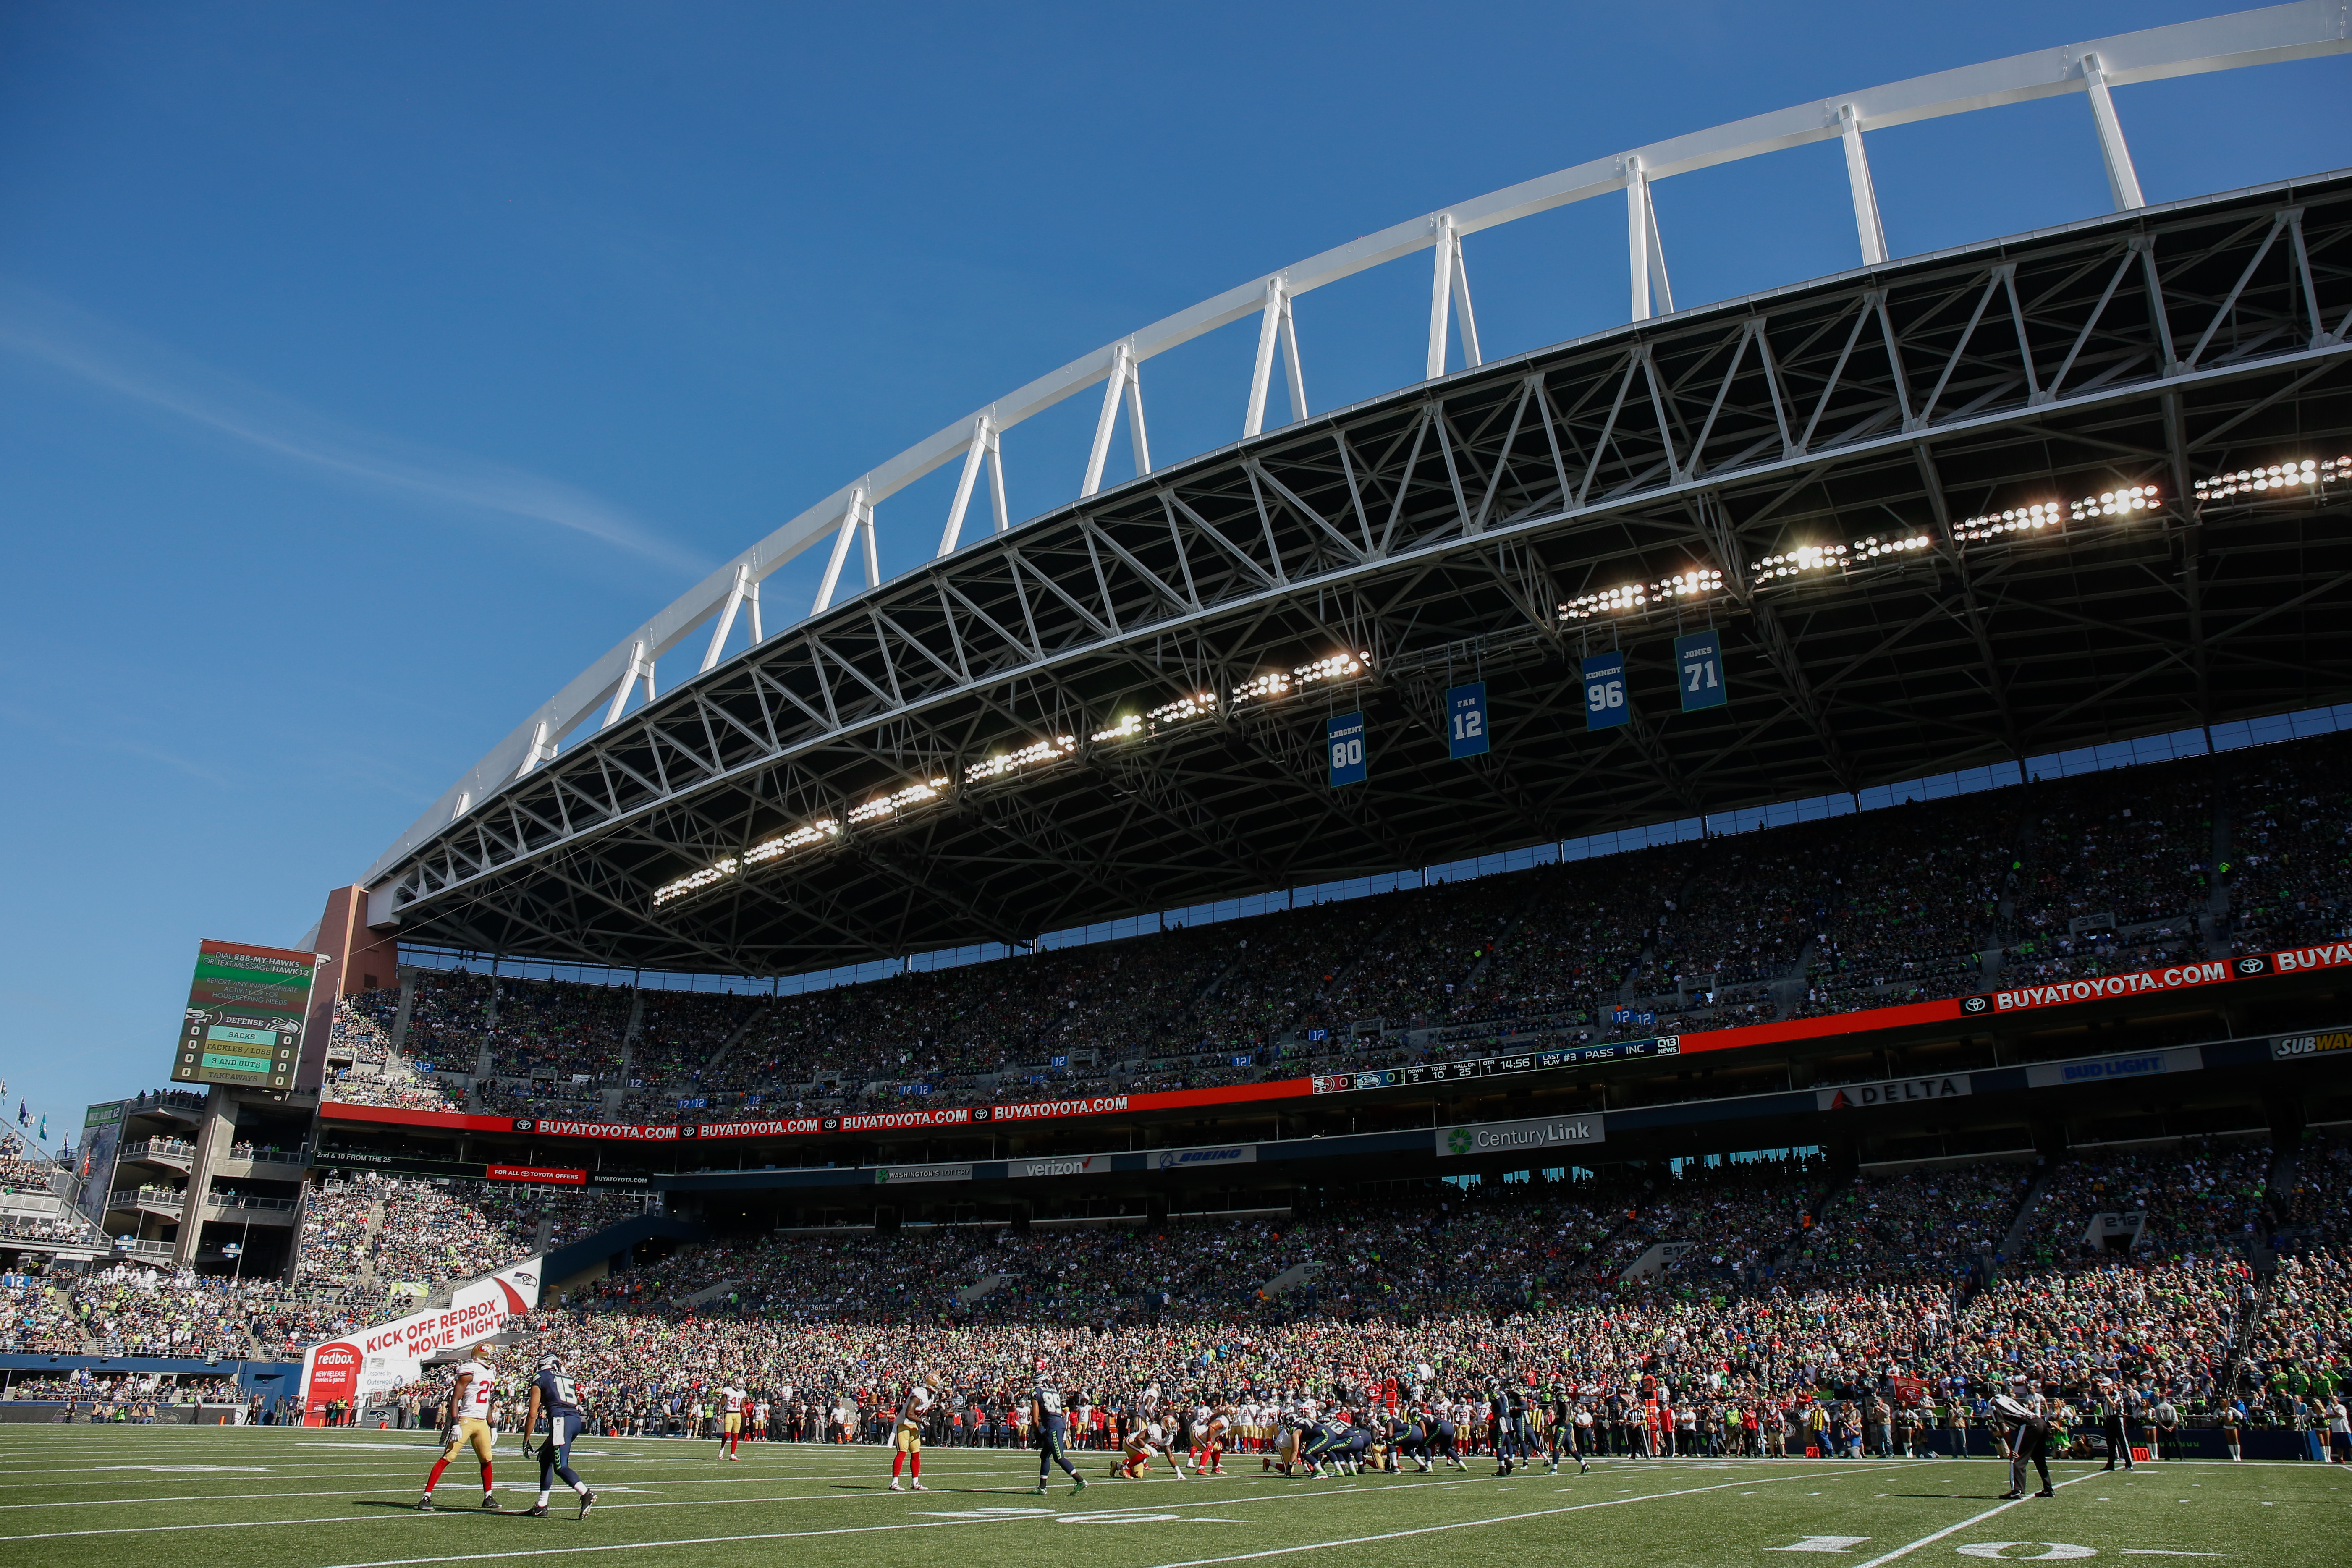 A general view during the game between the Seattle Seahawks and the San Francisco 49ers at CenturyLink Field on September 25, 2016 in Seattle, Washington.